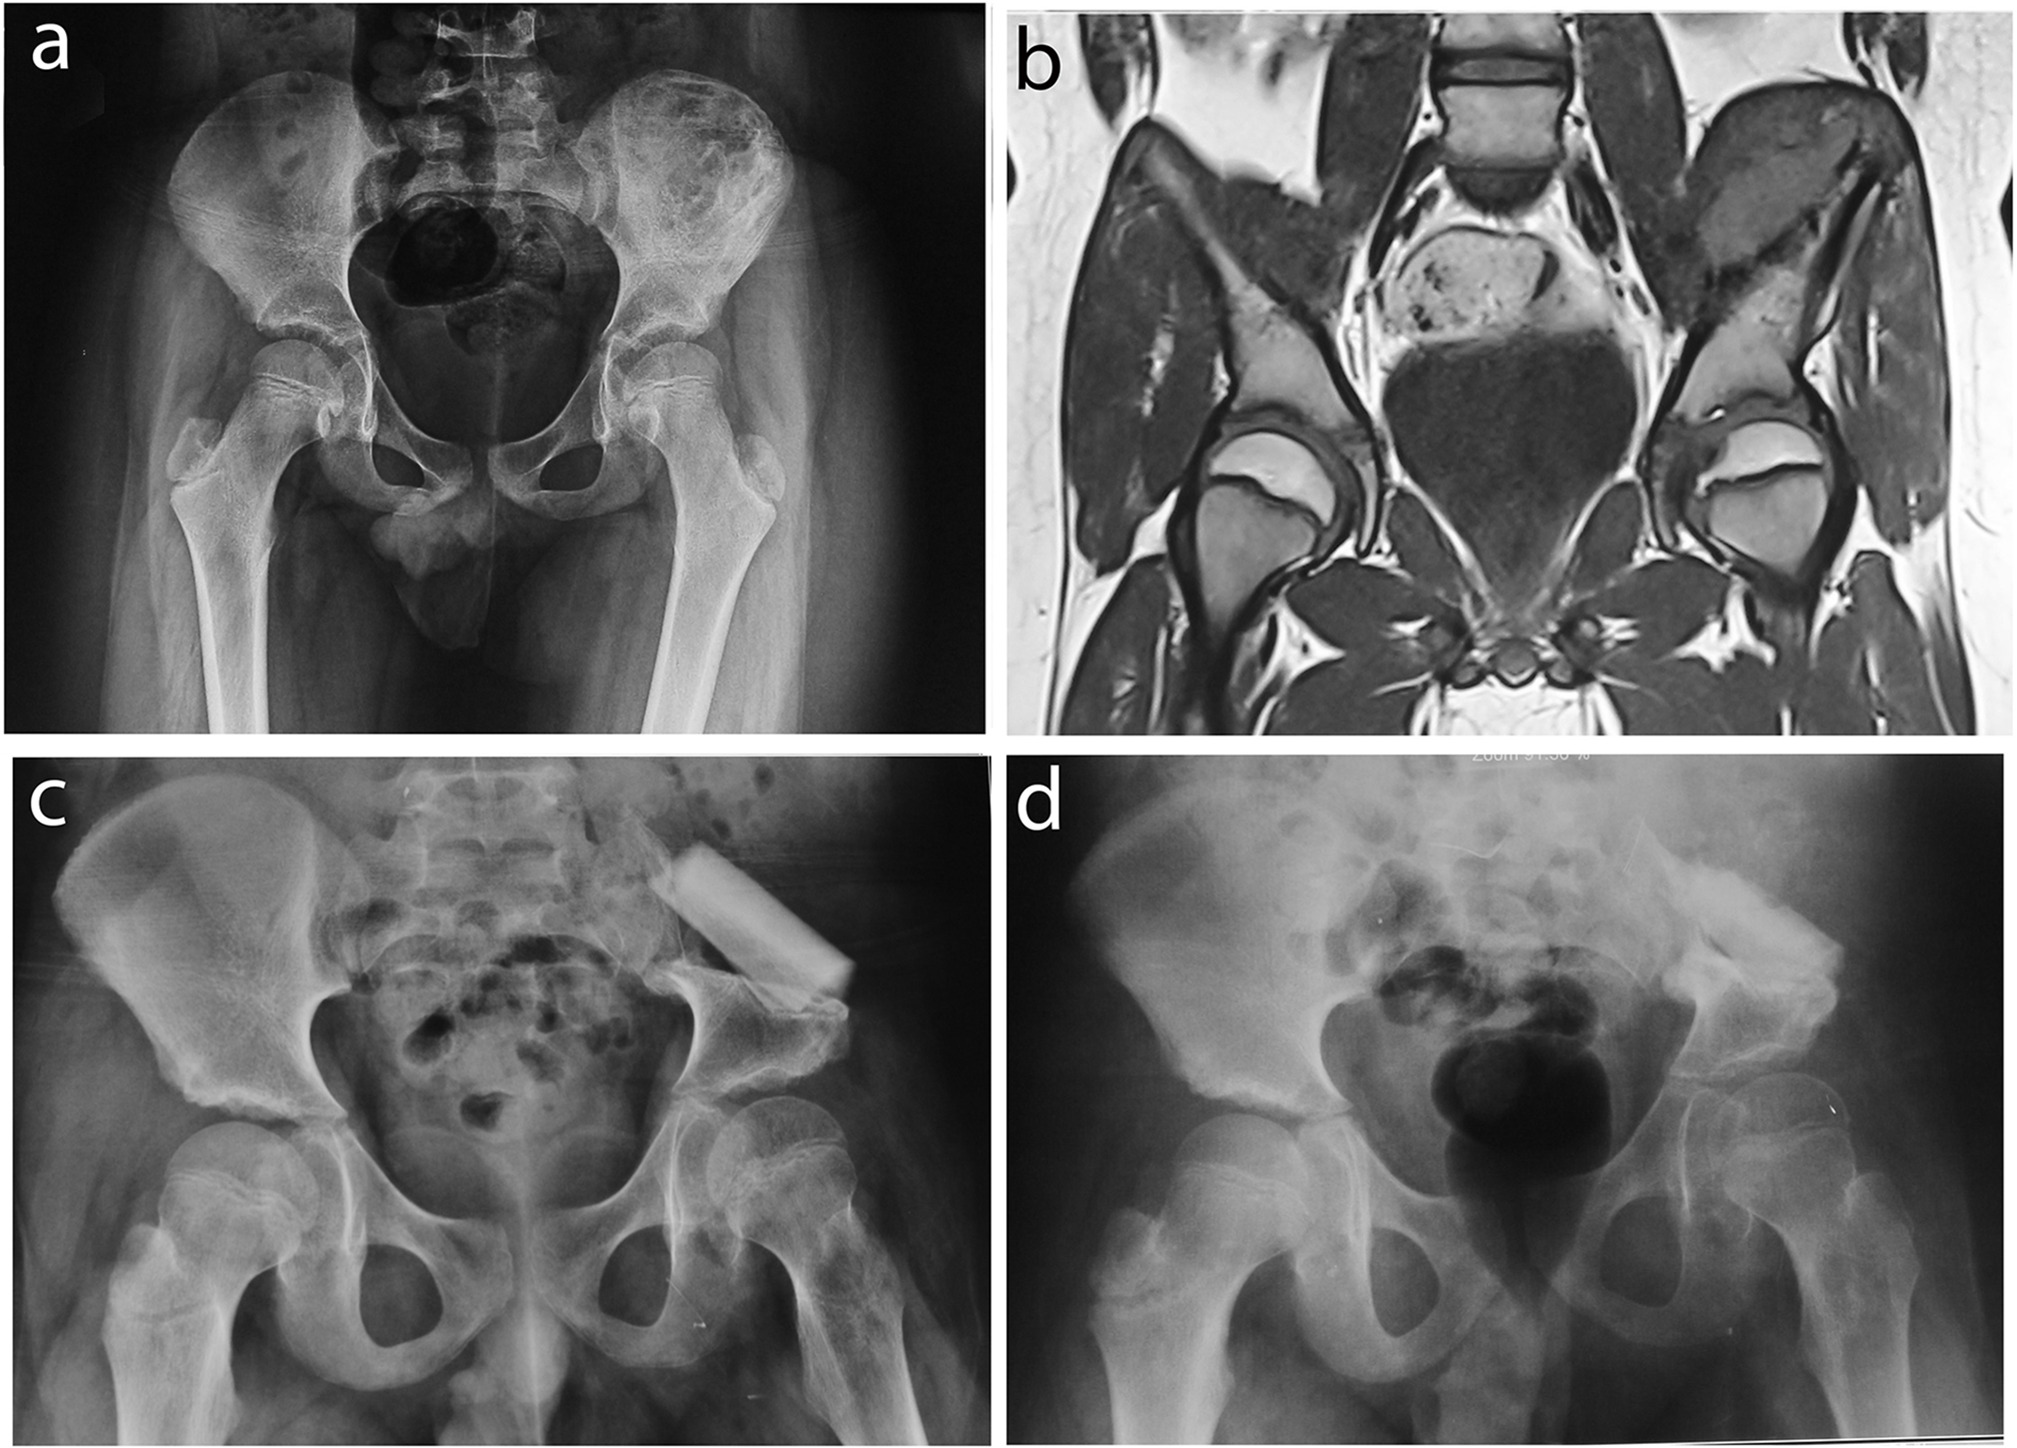 Fig. 3 
            a) Anteroposterior radiograph of the hip showing post-chemotherapy Ewing’s sarcoma of the ilium in a ten-year-old male. b) T1-weighted MRI of the hip showing the intact sciatic notch (Zone I1 resection). c) Anteroposterior radiograph of the hip three months after surgical resection and reconstruction with tibial strut graft. d) Anteroposterior radiograph of the hip five years after surgical resection and reconstruction, showing a limb shortening of 2 cm.
          